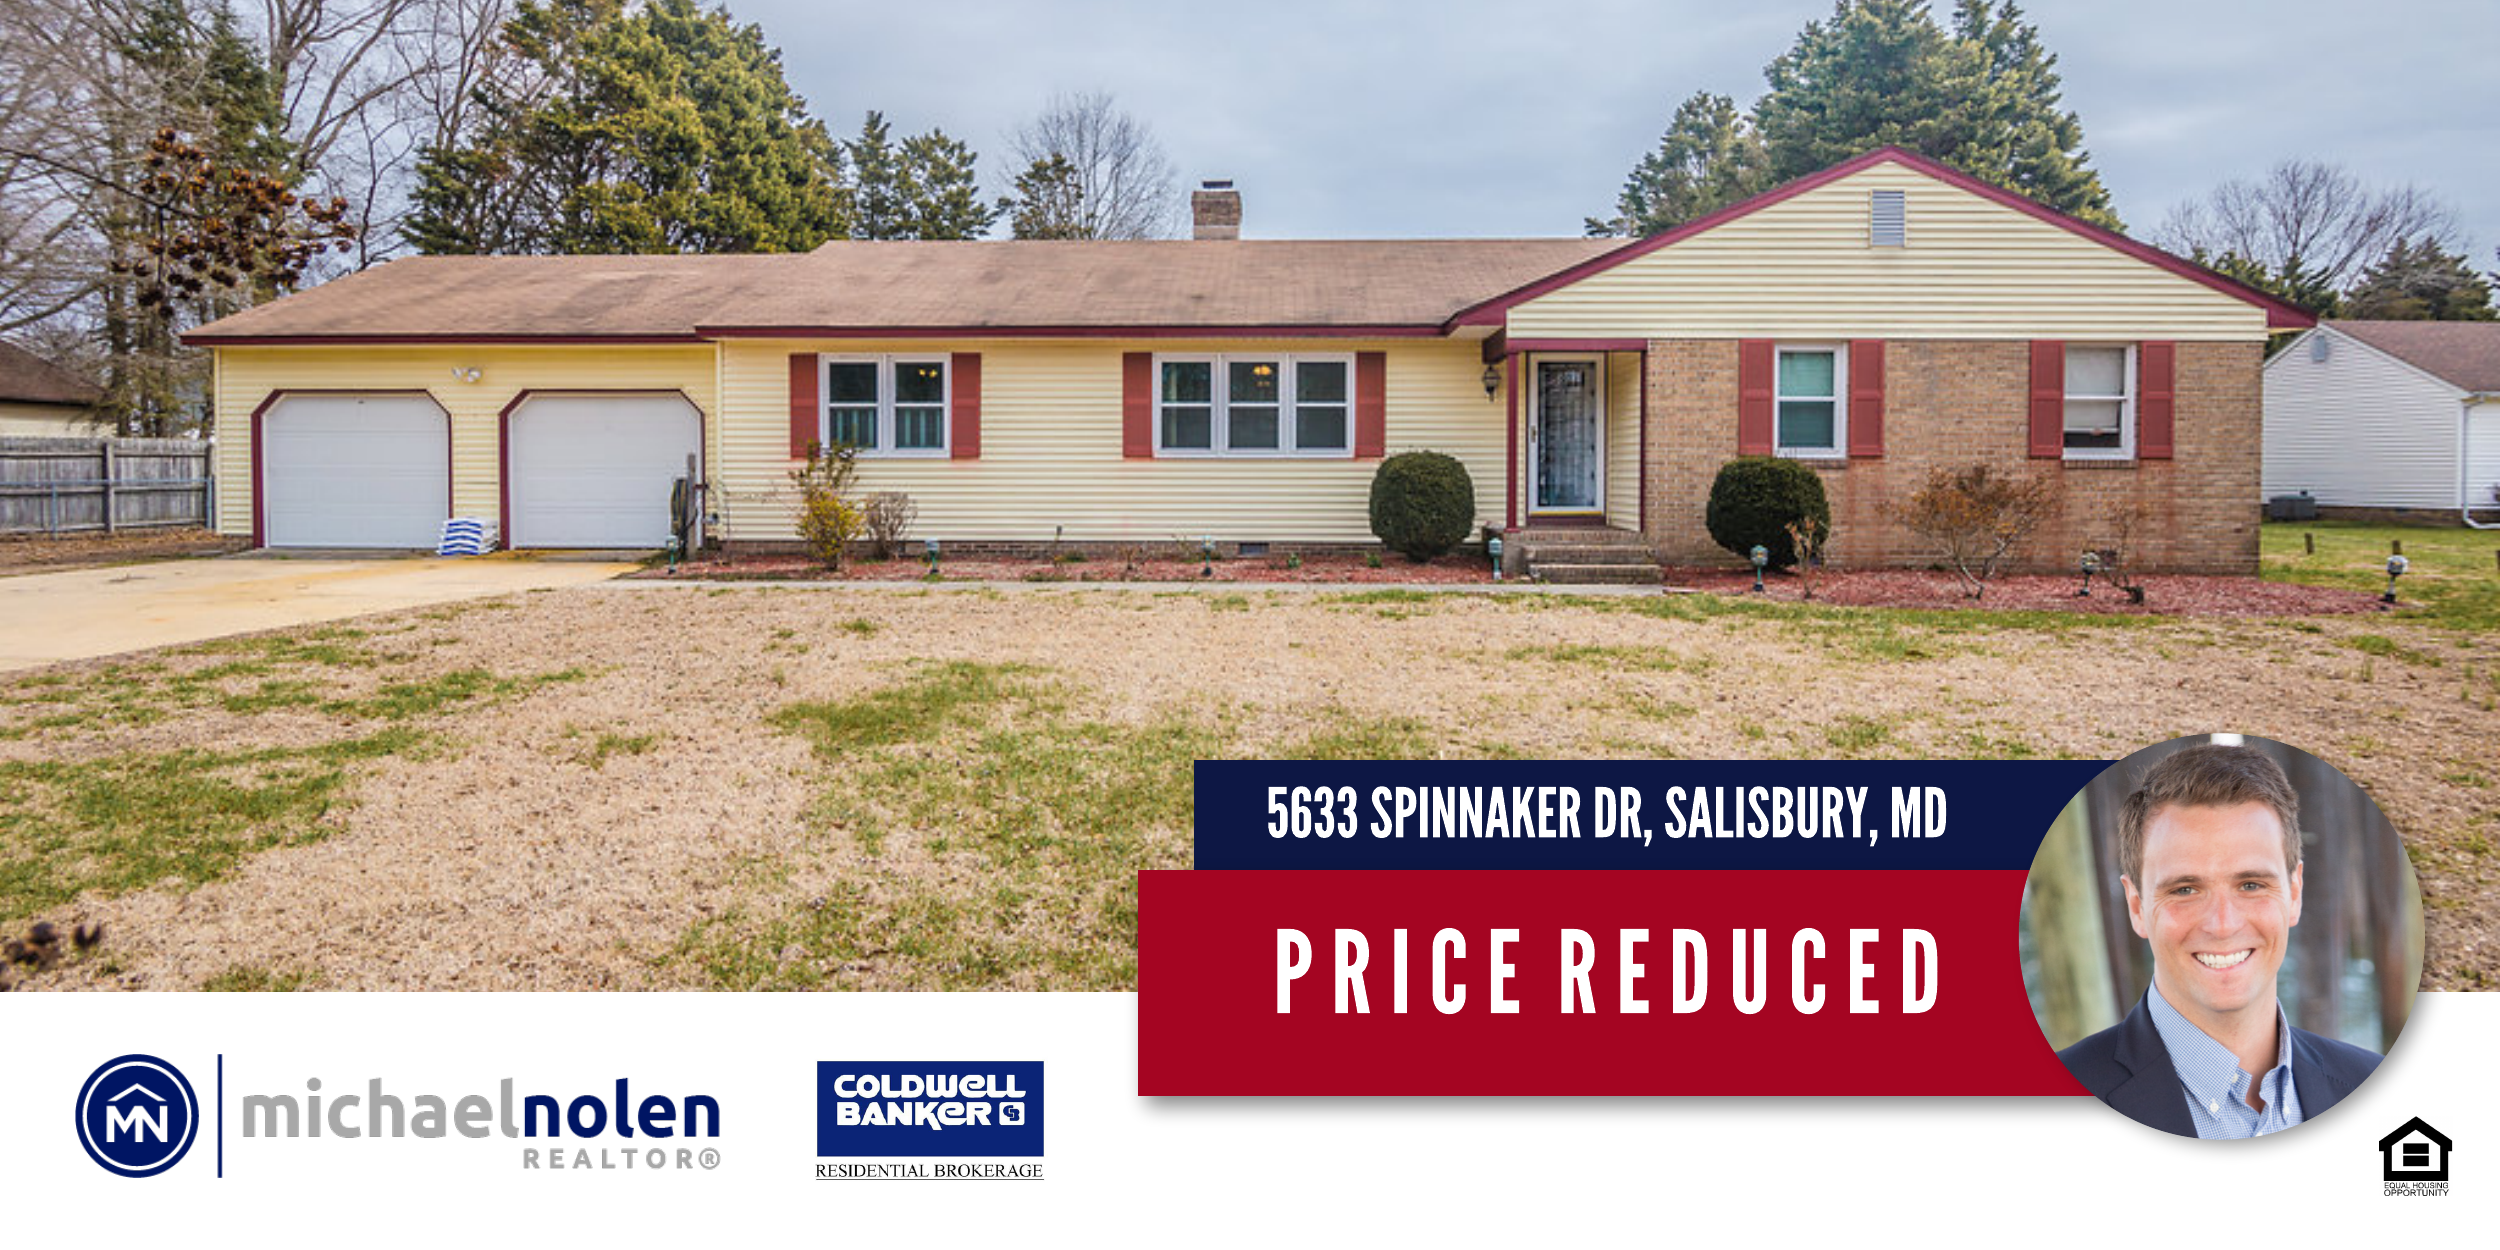 Banner Ad - Price Reduced - Spinnaker Dr